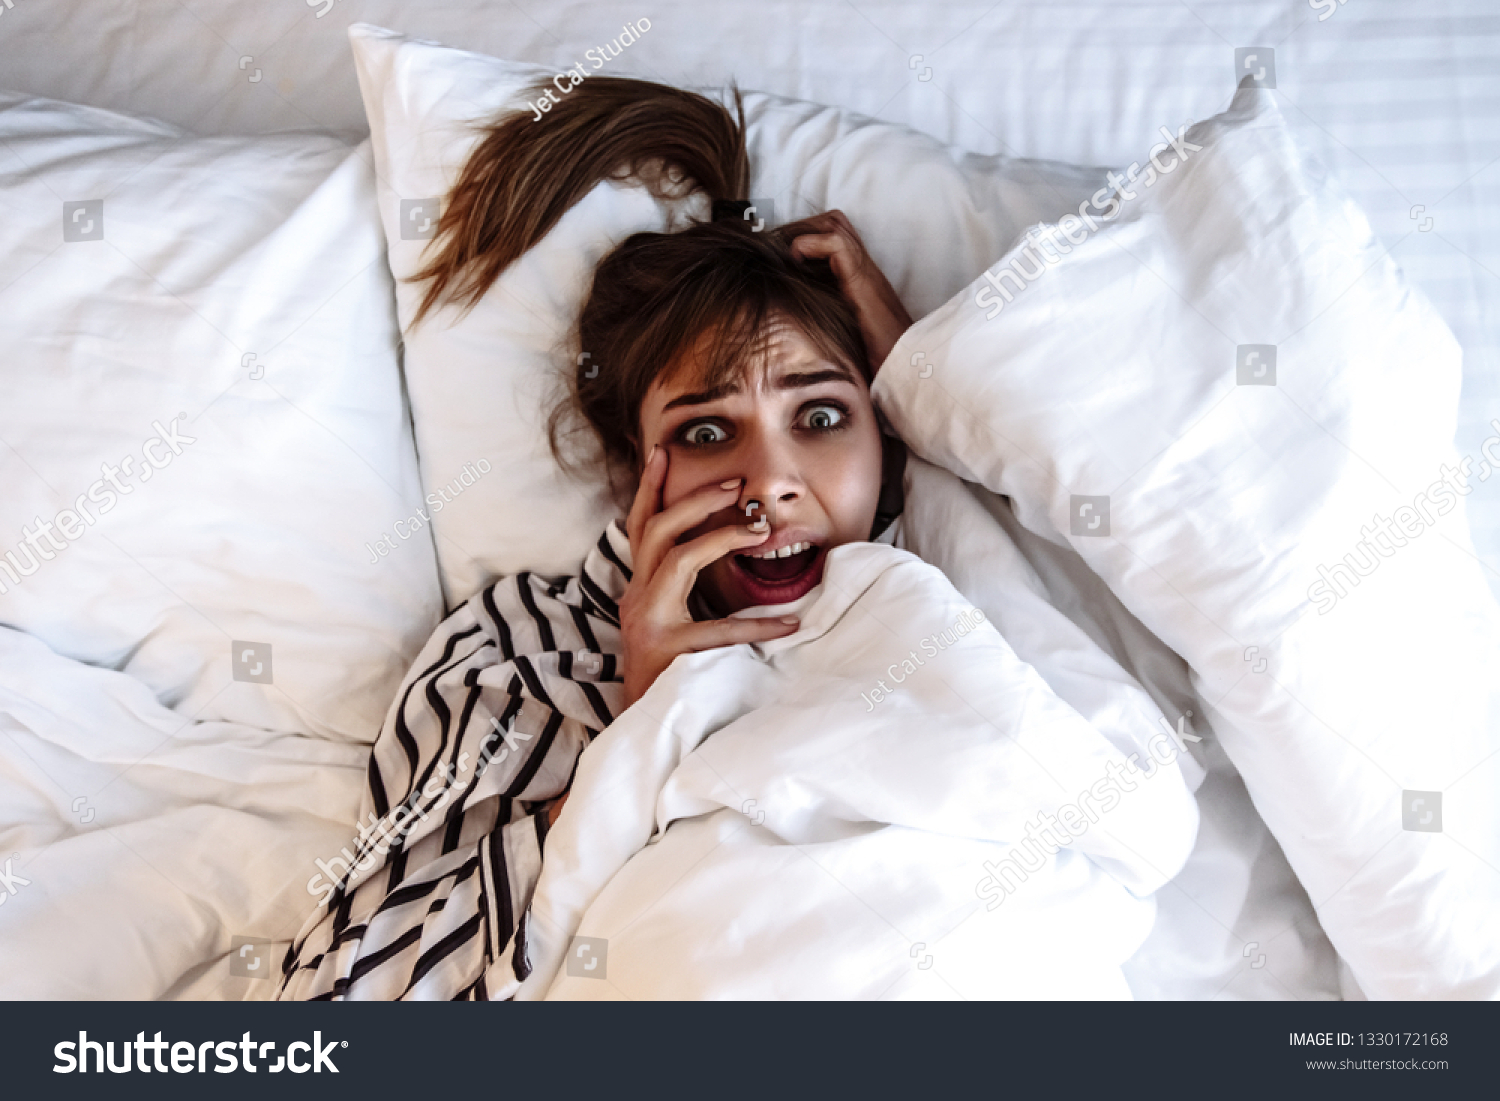 1,210 Wake up scared Stock Photos, Images & Photography | Shutterstock